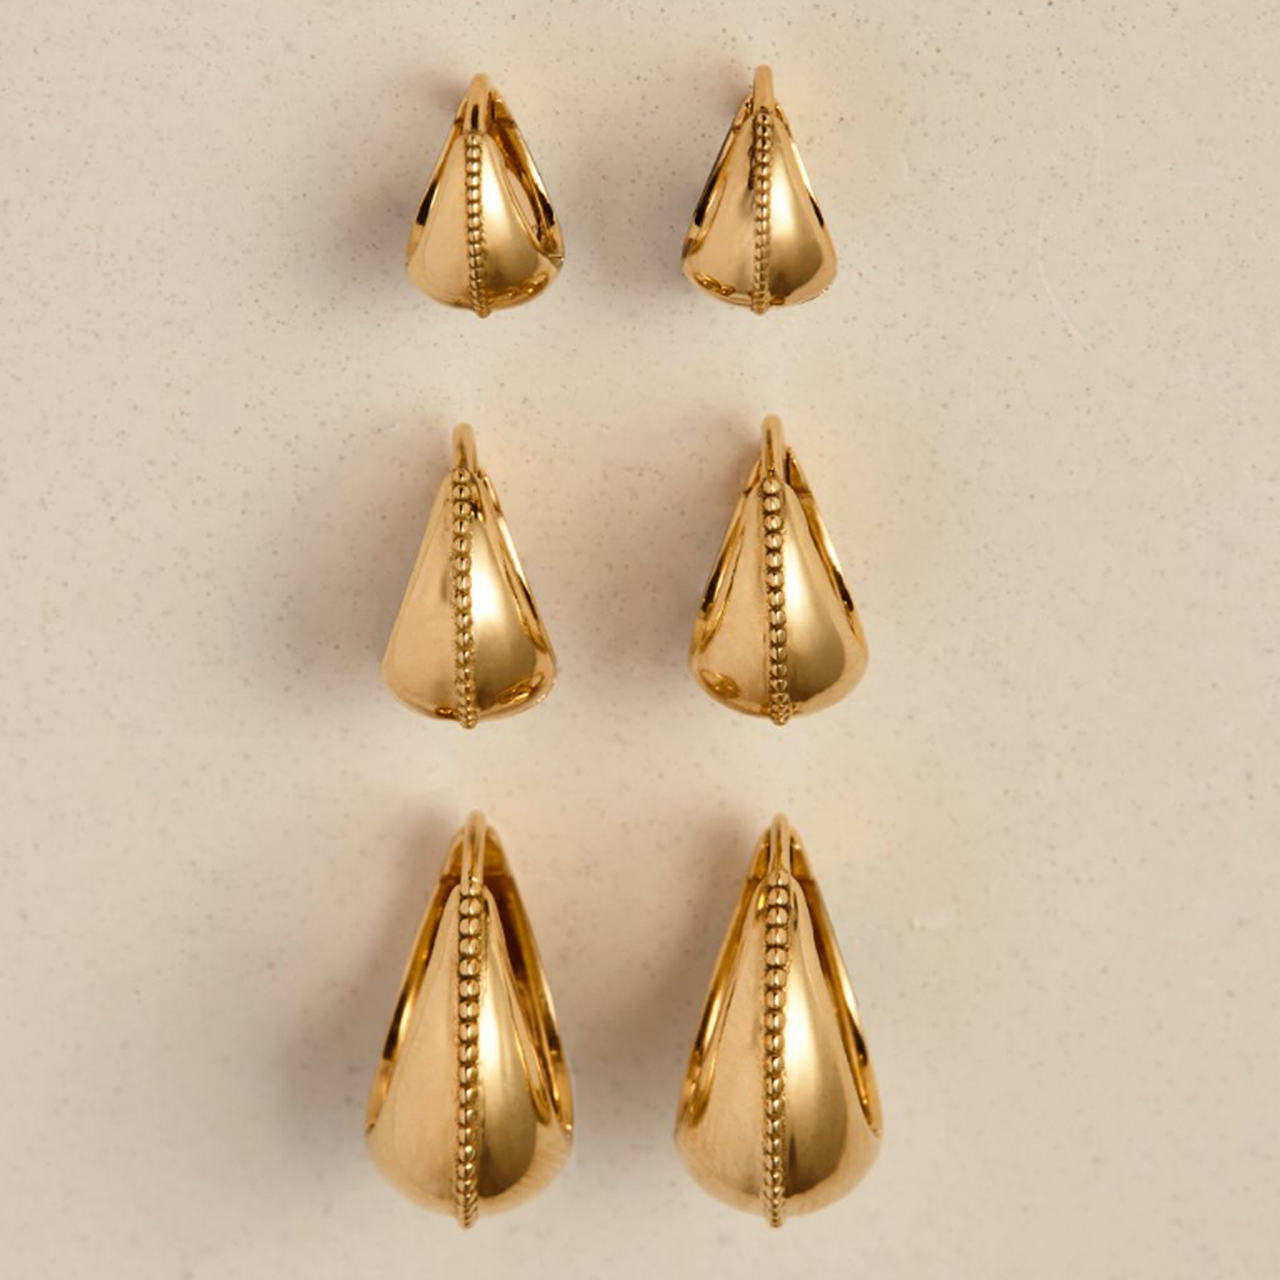 Chunky Gold Jewellery: A Statement-Making Trend from Tomfoolery London